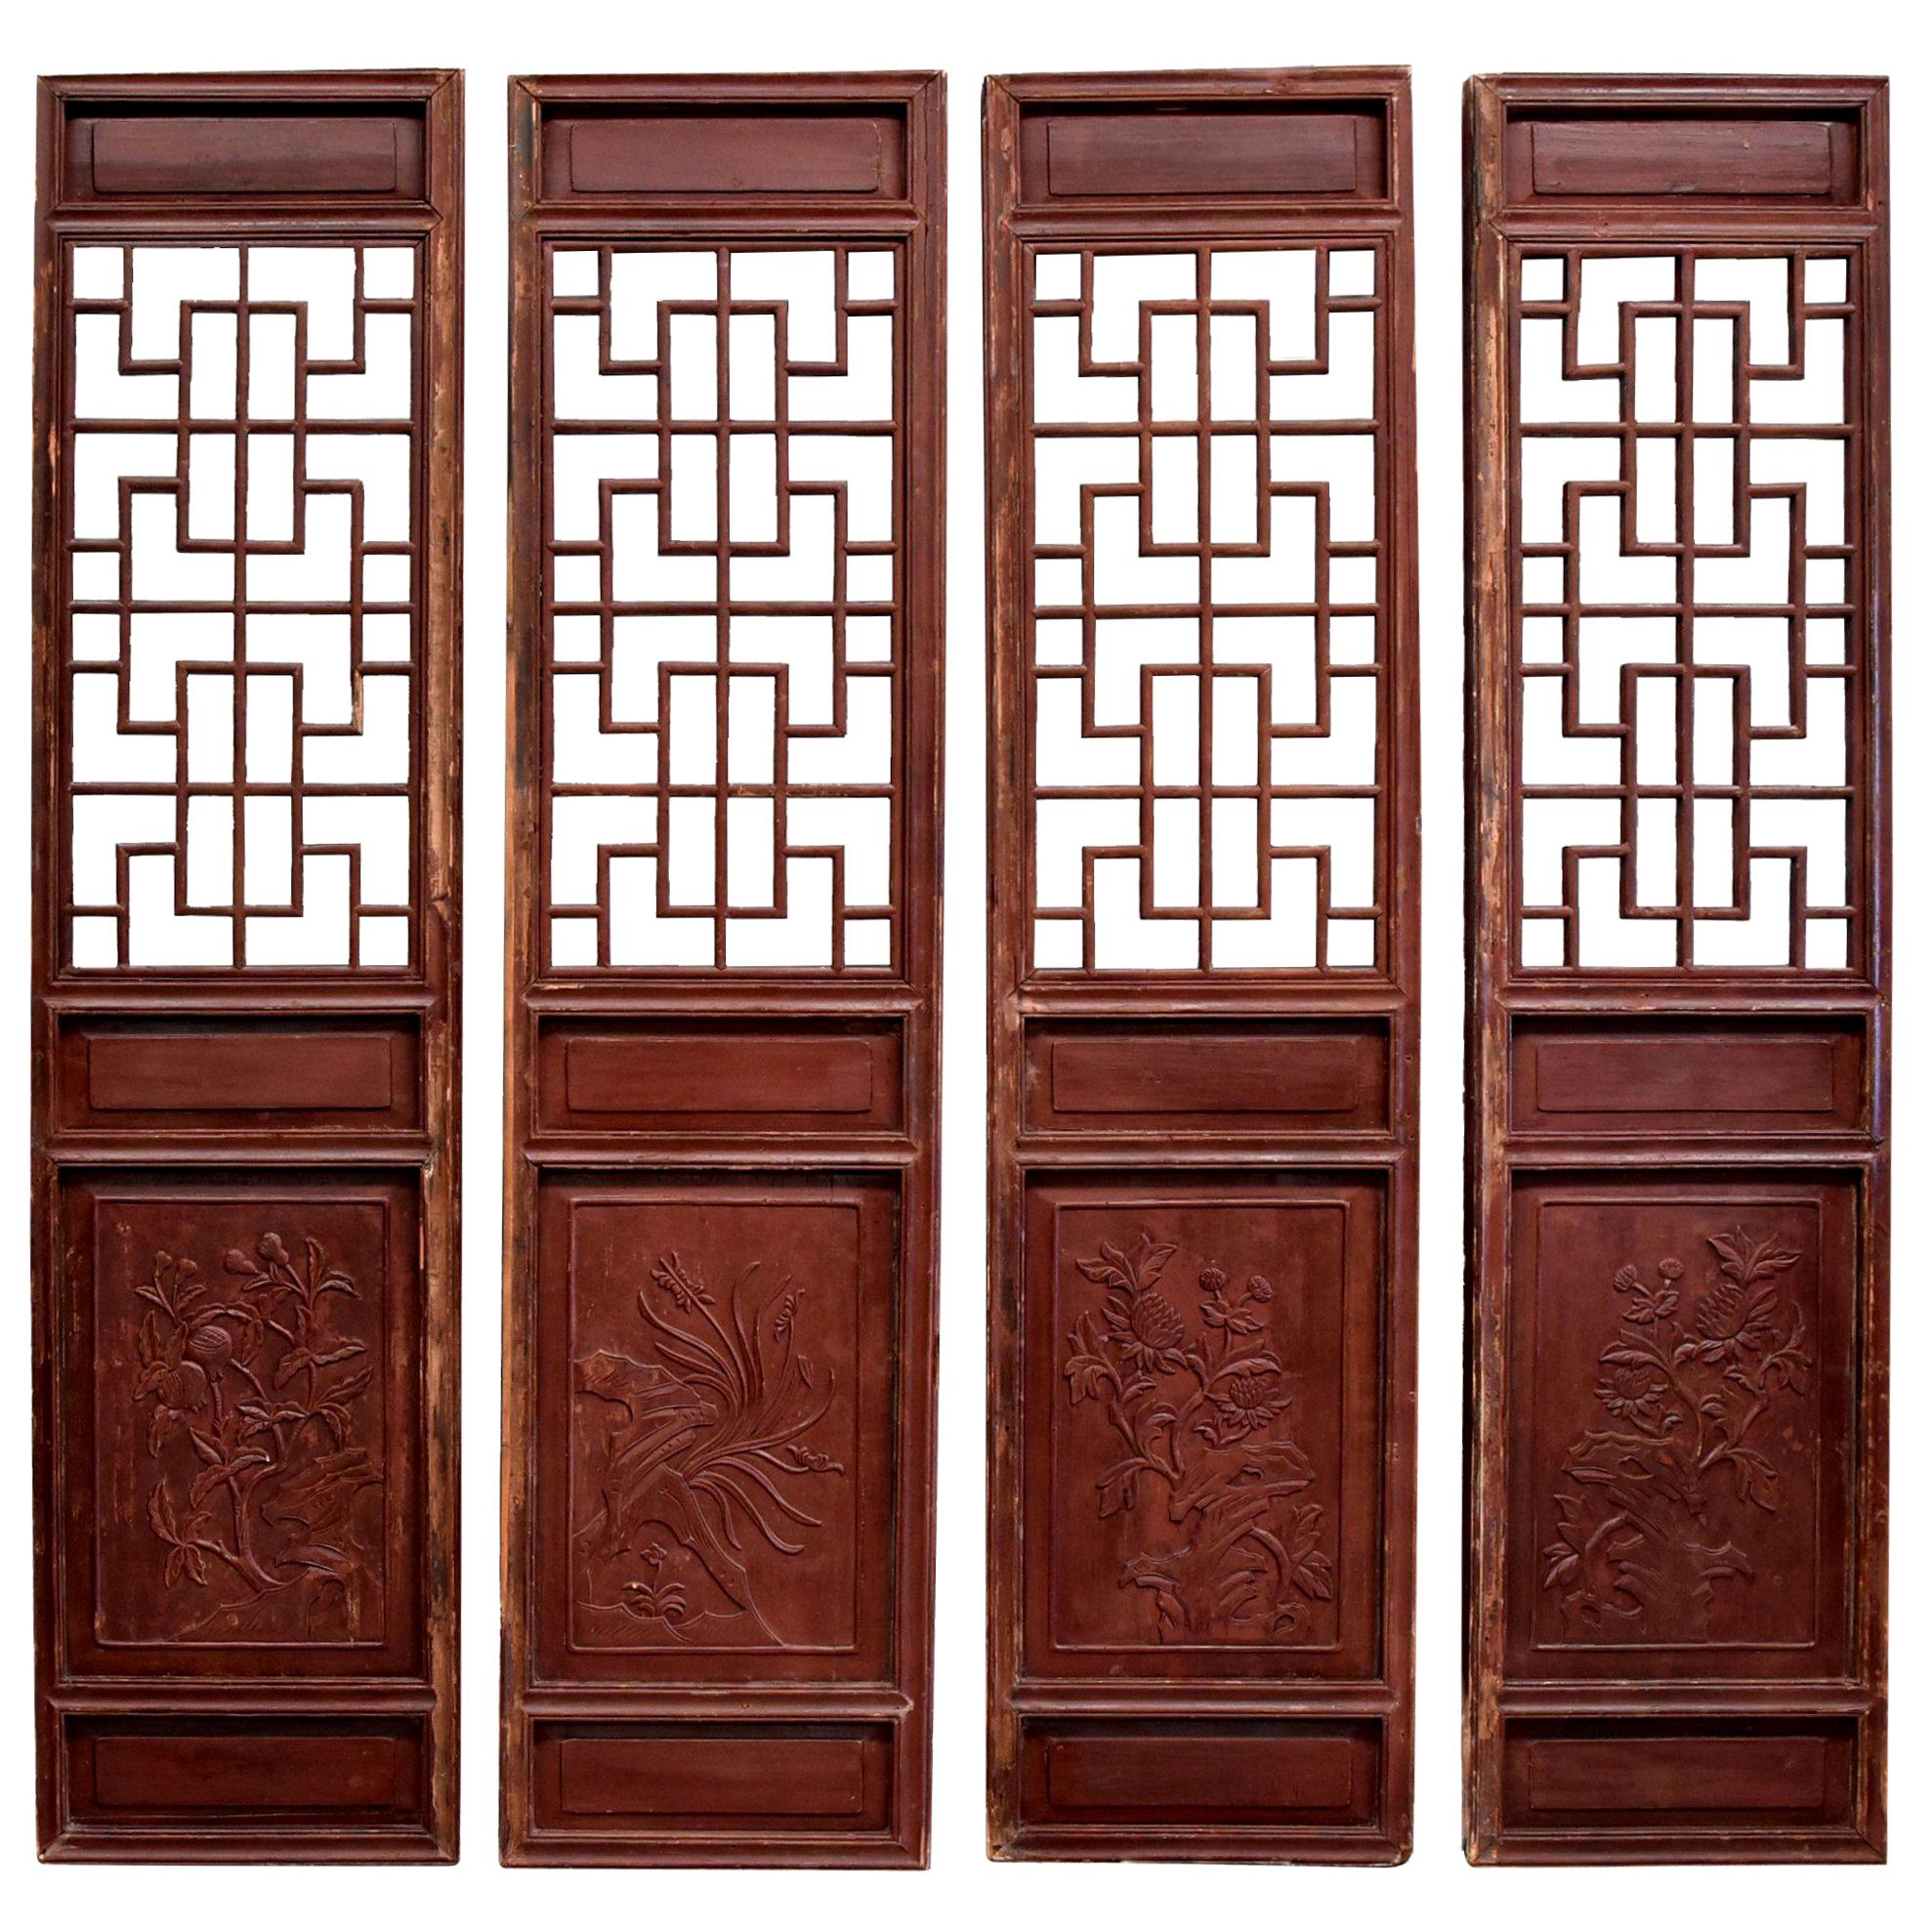 Chinese Antique Screens, Doors, Set of 4, Blooms and Longevity